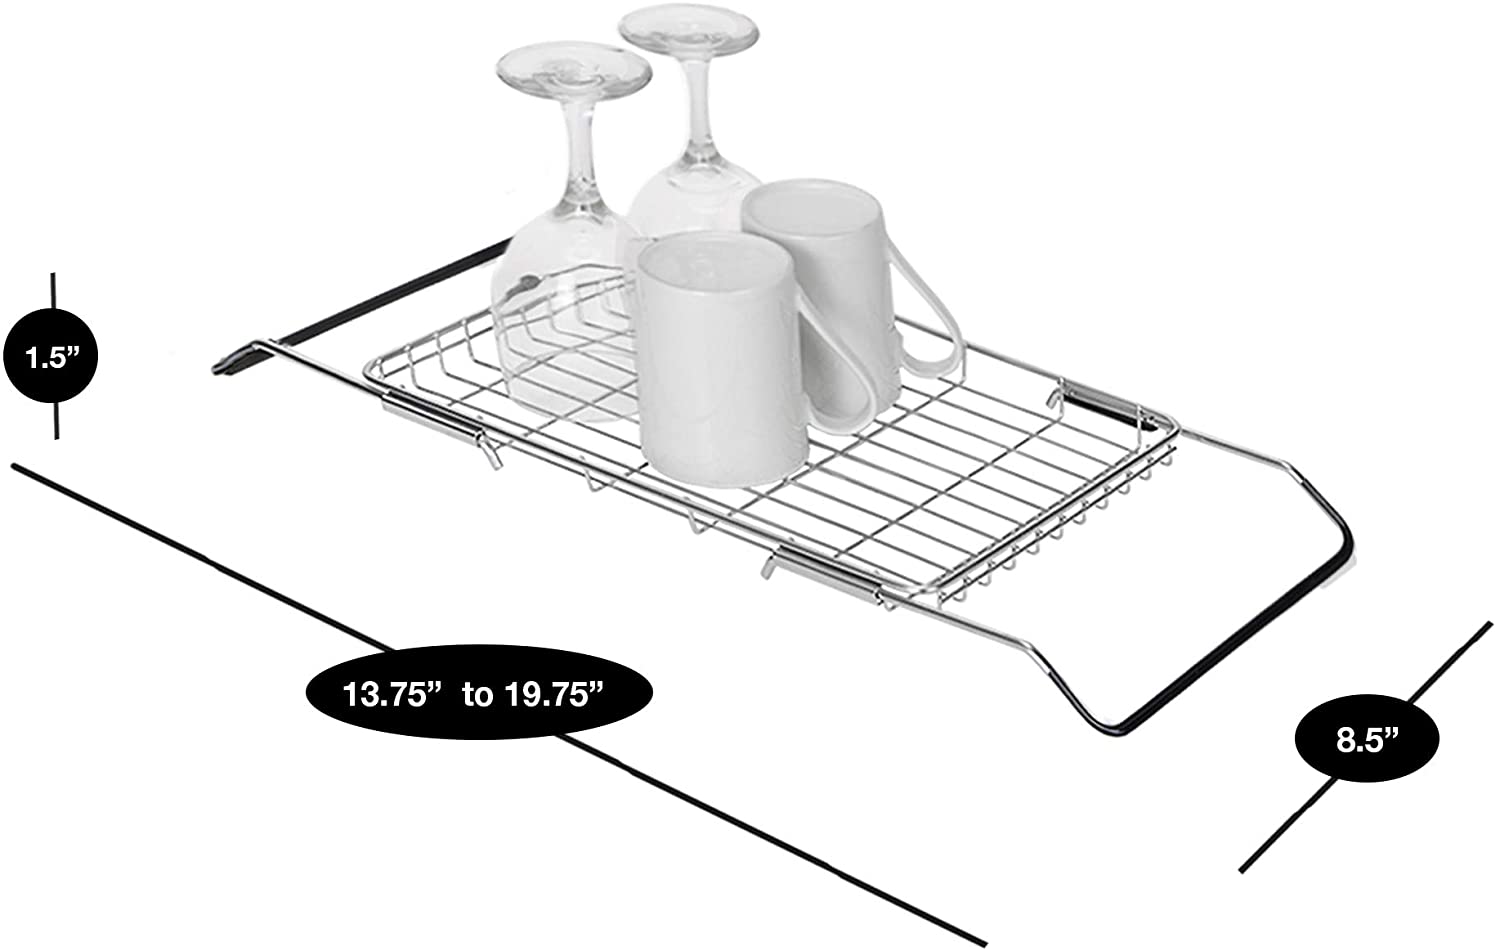 https://cdn.shopify.com/s/files/1/2393/7799/products/expandable-dish-drainer-with-adjustable-arms-smart-design-kitchen-8106718-incrementing-number-926480.jpg?v=1679342856